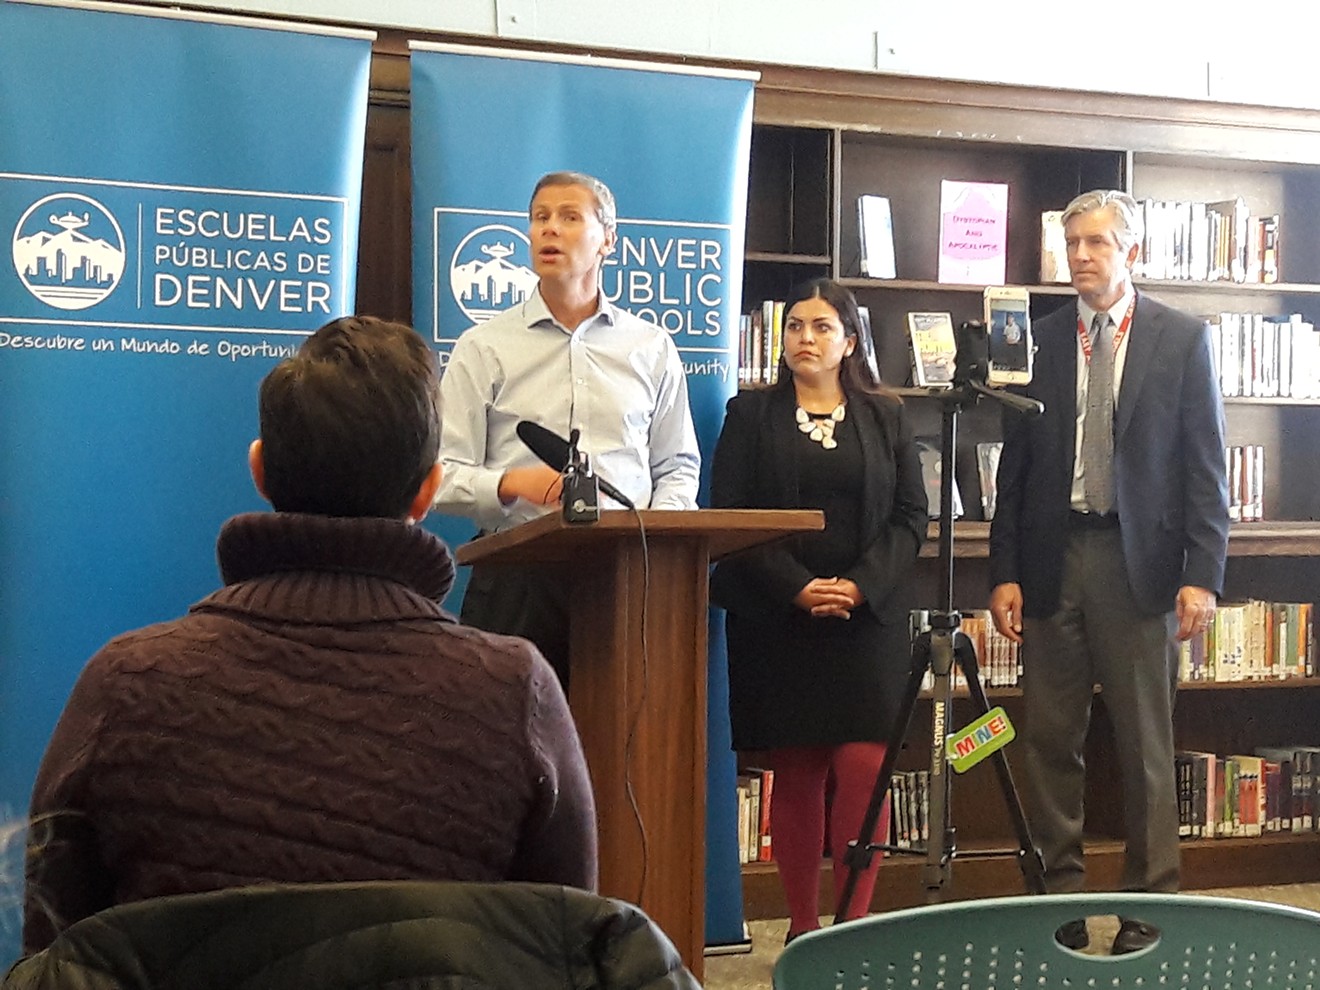 Denver Public Schools Superintendent Tom Boasberg announced the expansion of a pilot program to prioritize low-income students under the Strengthening Neighborhoods Initiative on January 23.